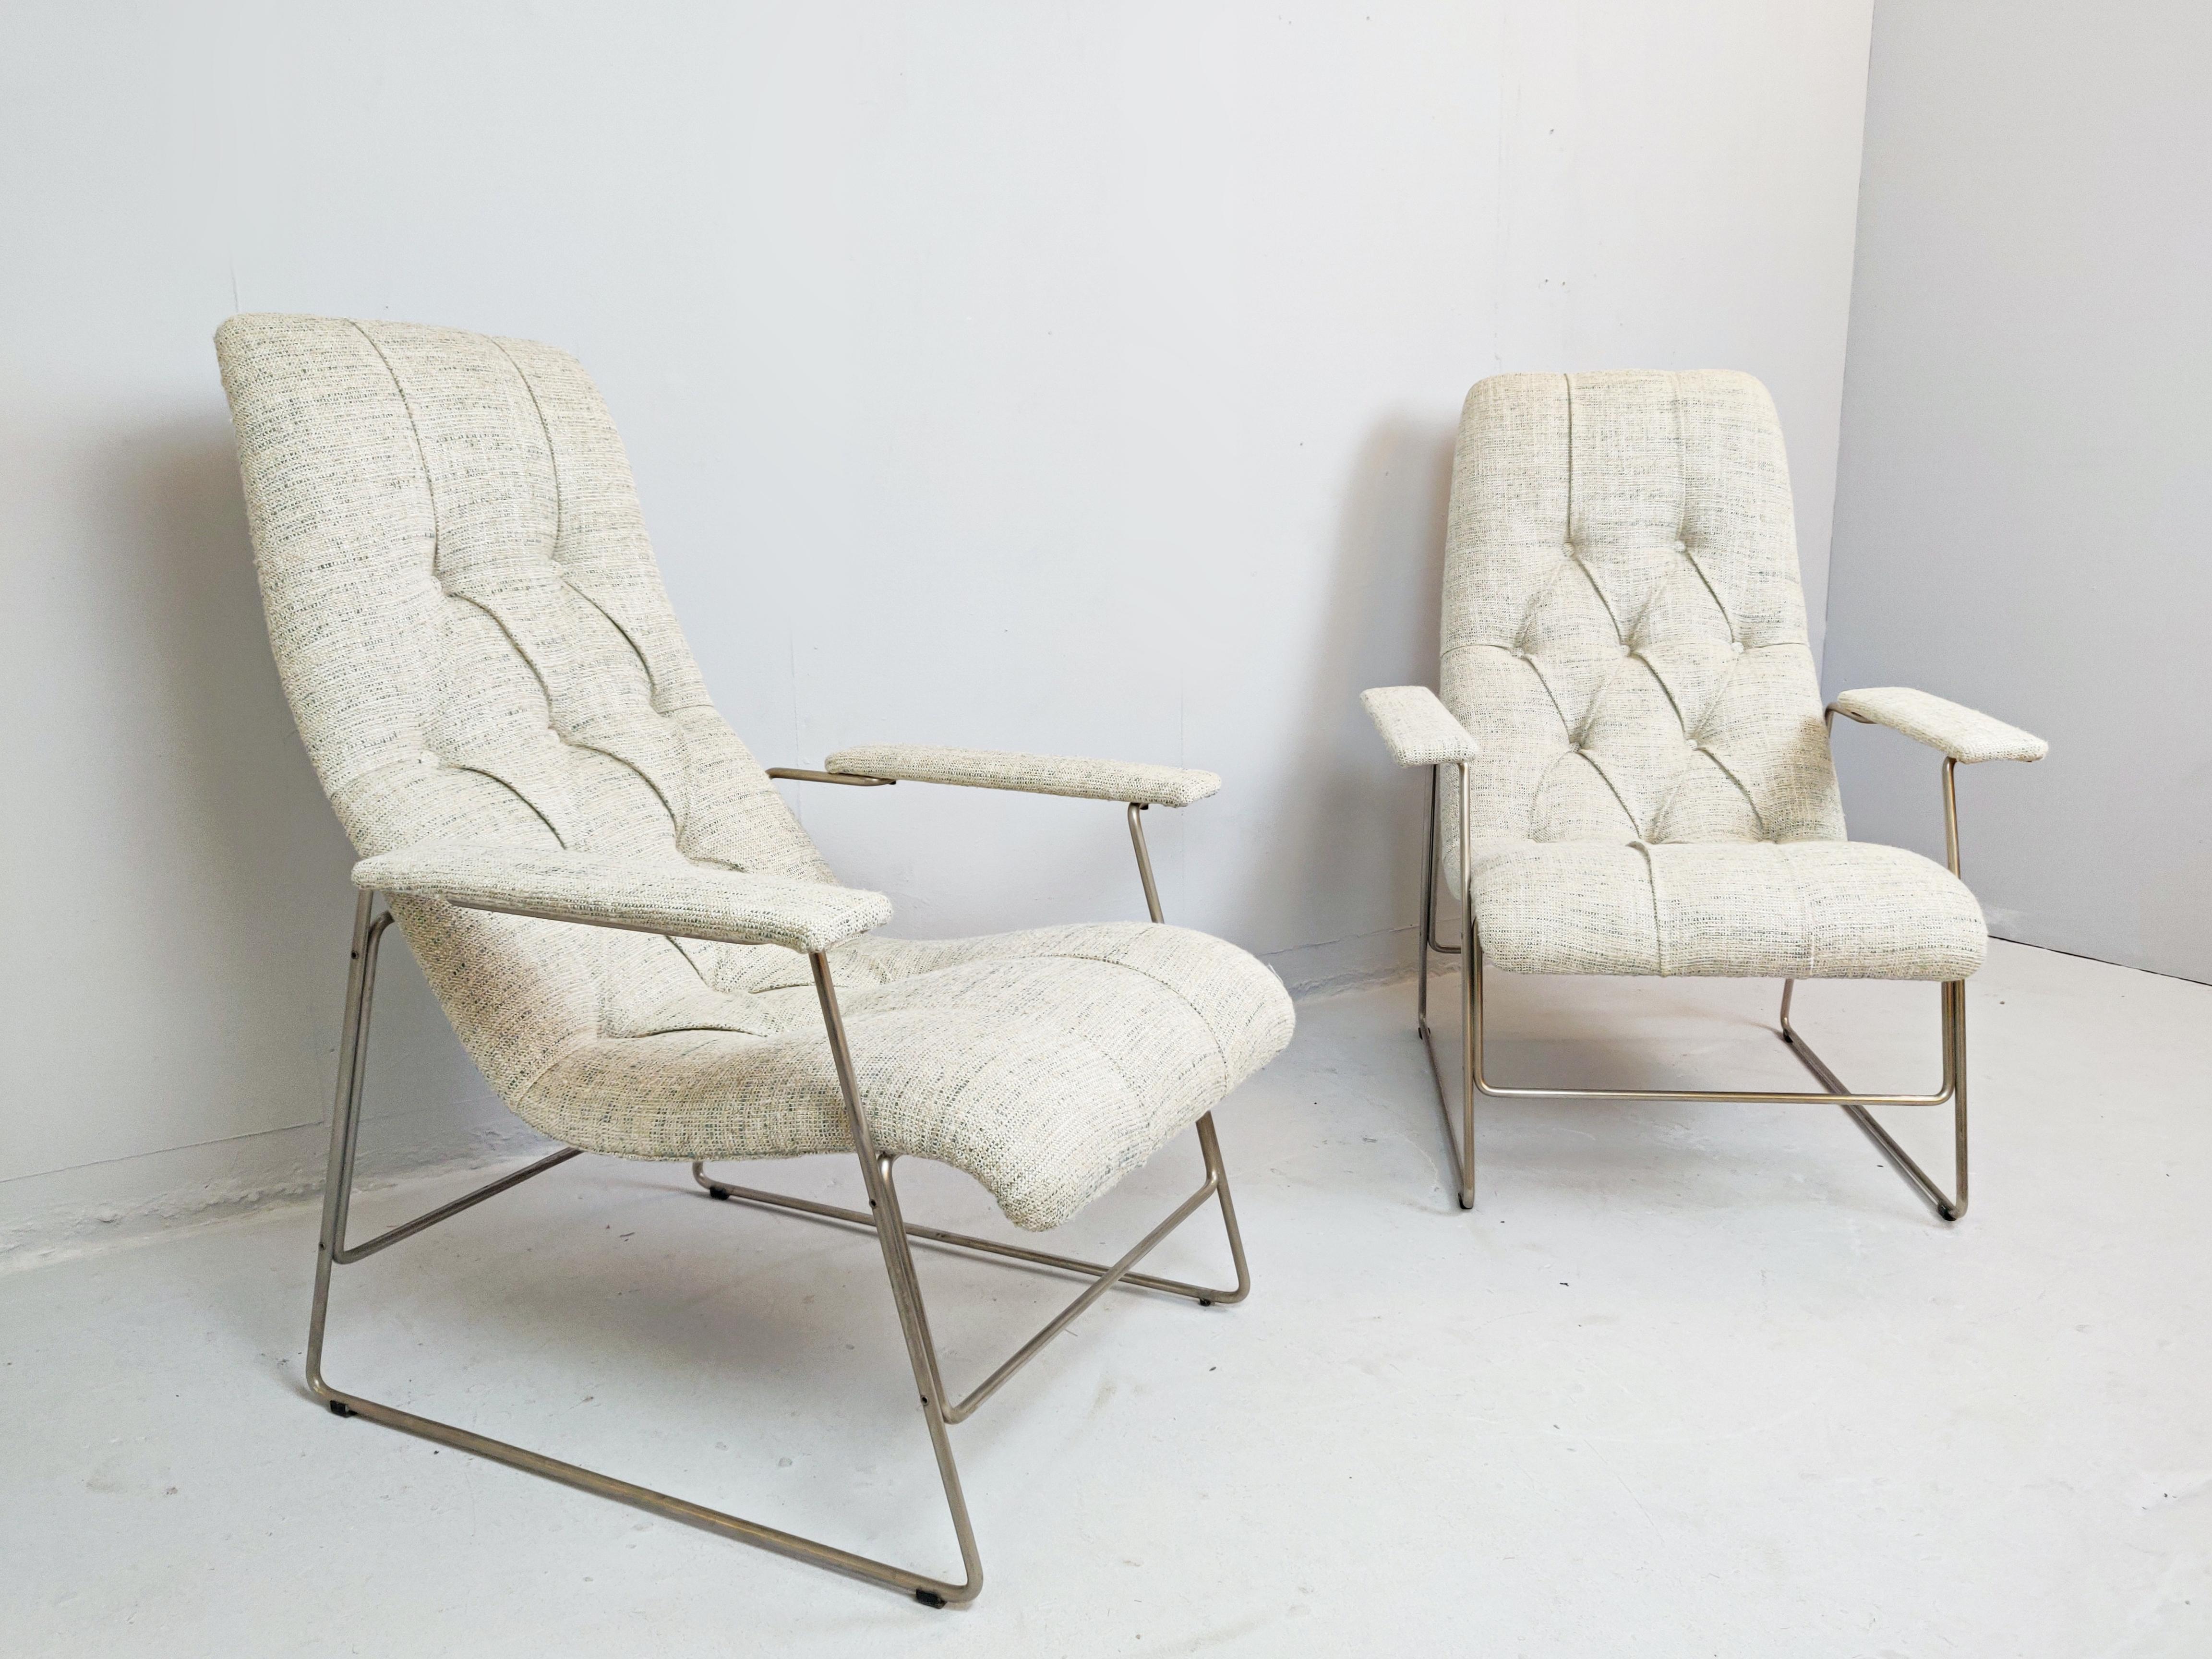 Pair of Italian armchairs, seat position adjustable, 1960s
two-seat positions possible.